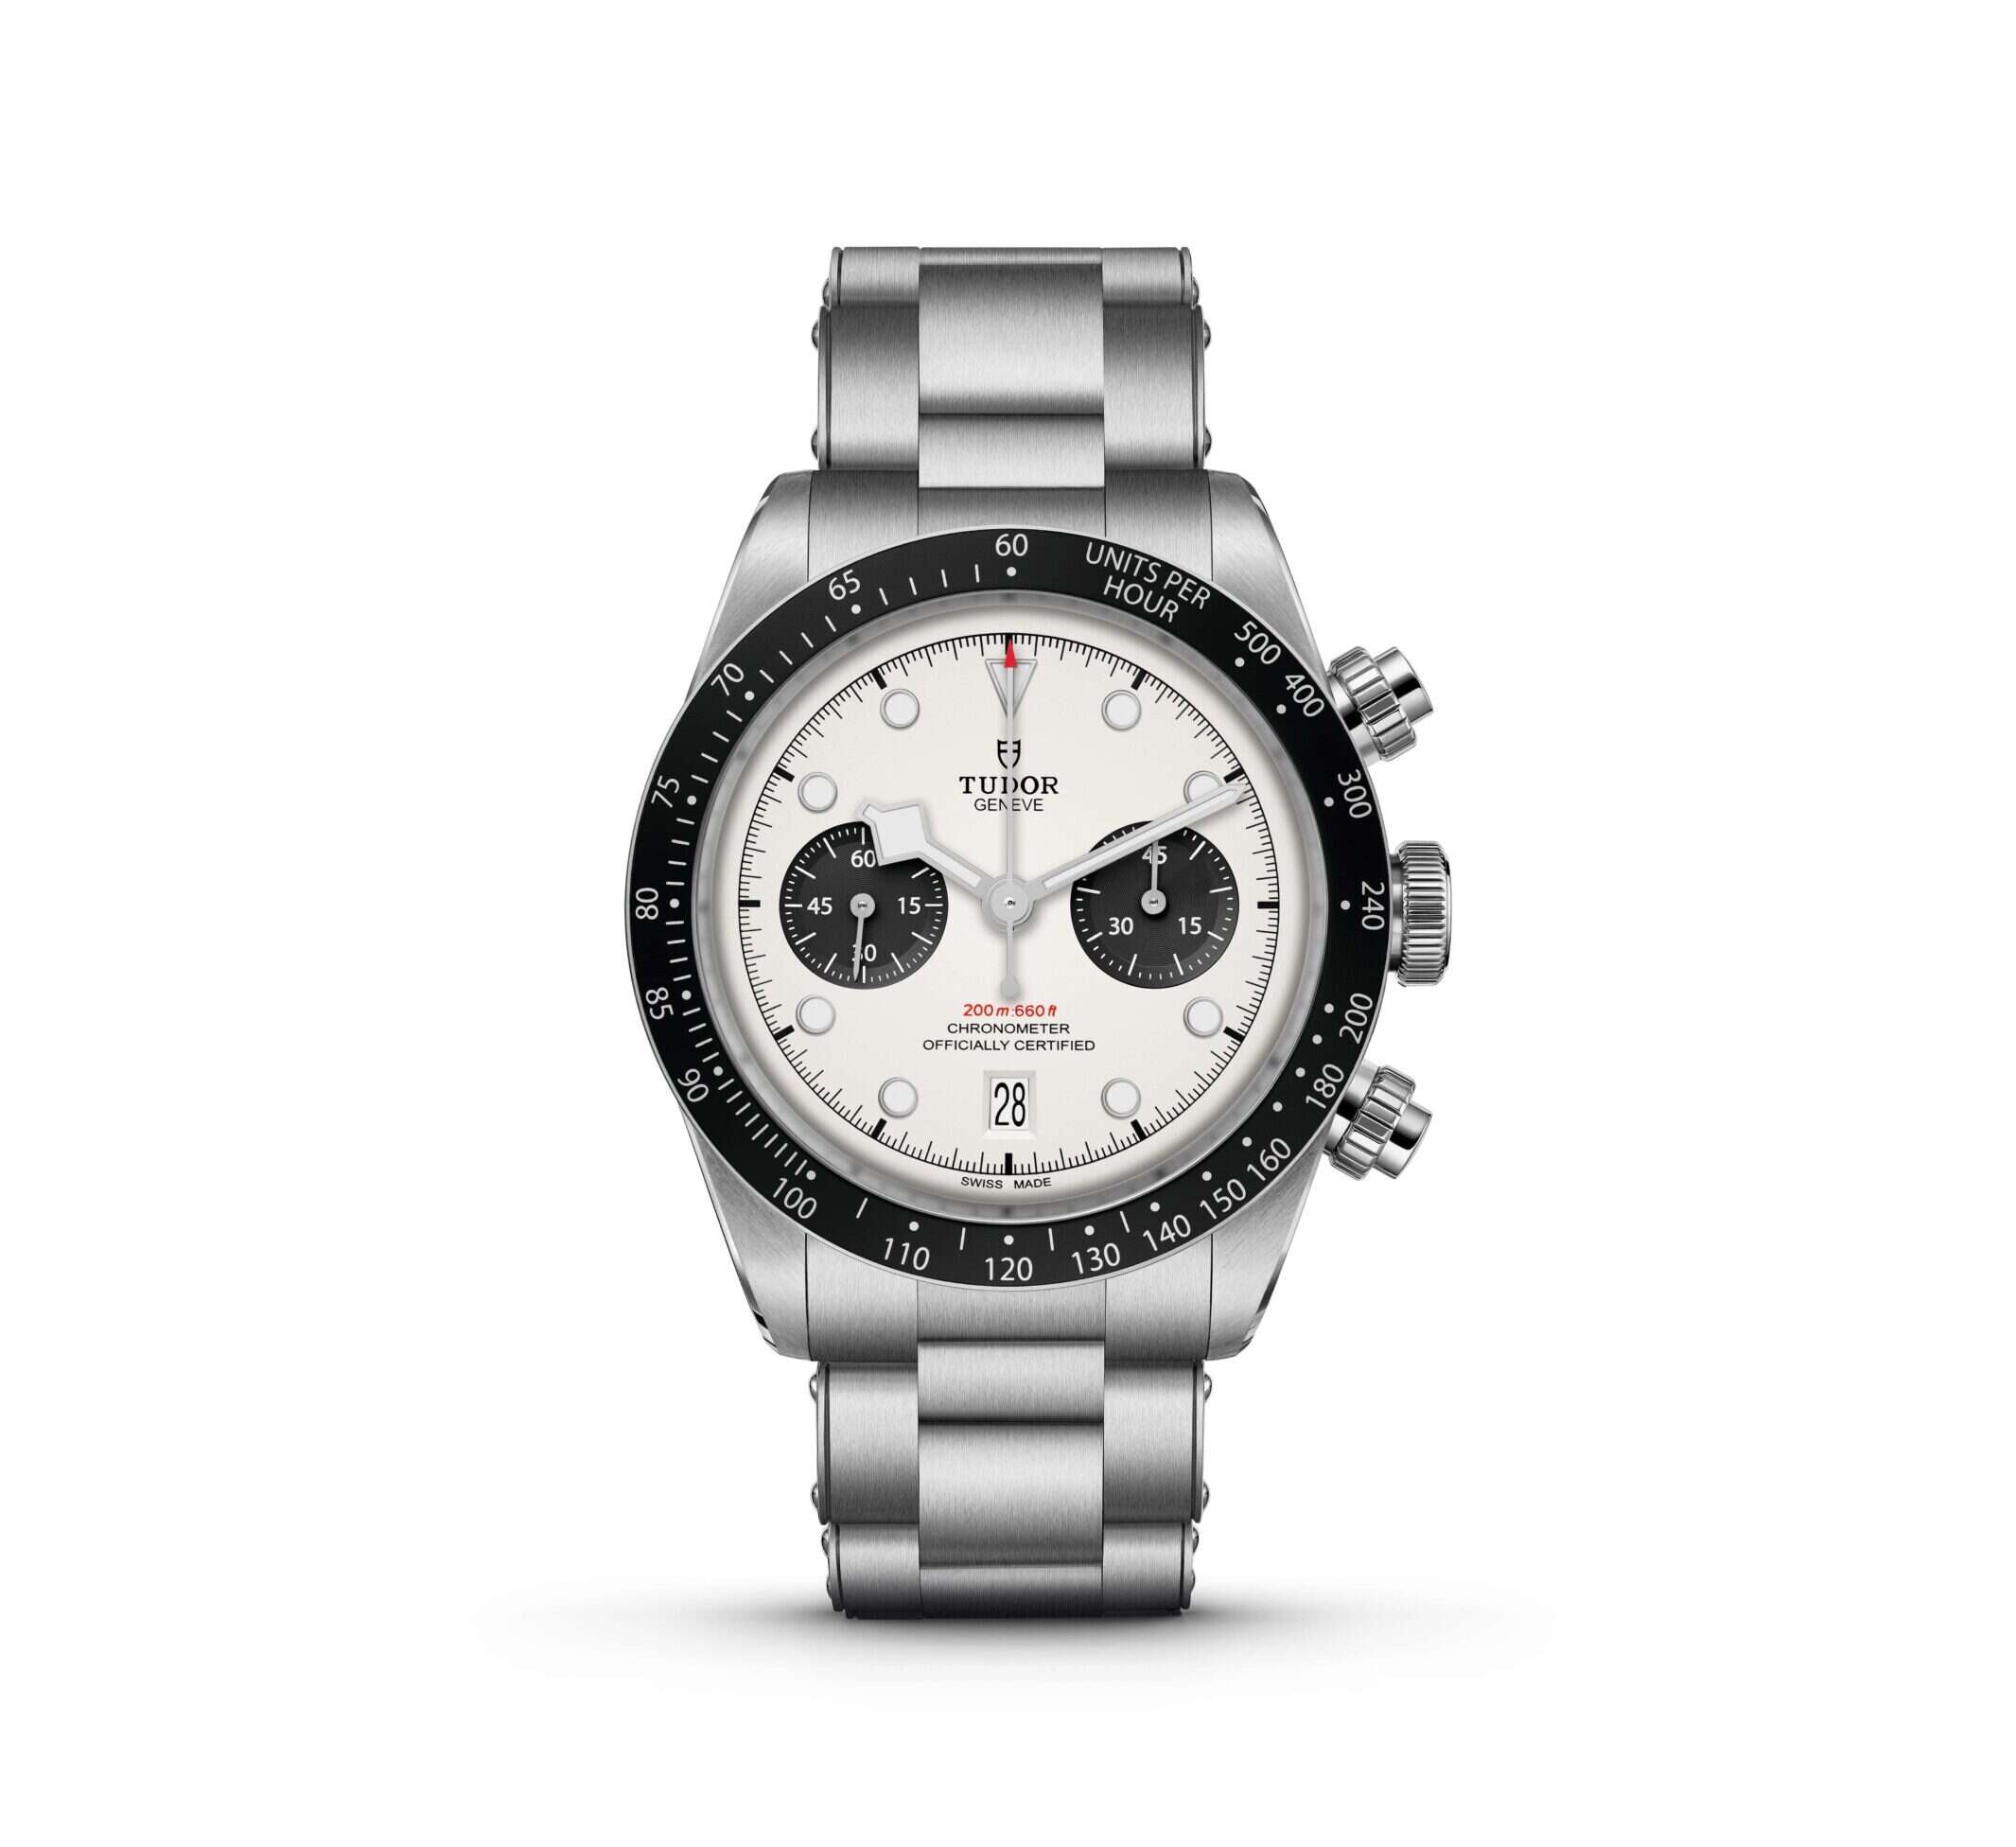 Steeling Time: The Best Men's Stainless Steel Watches